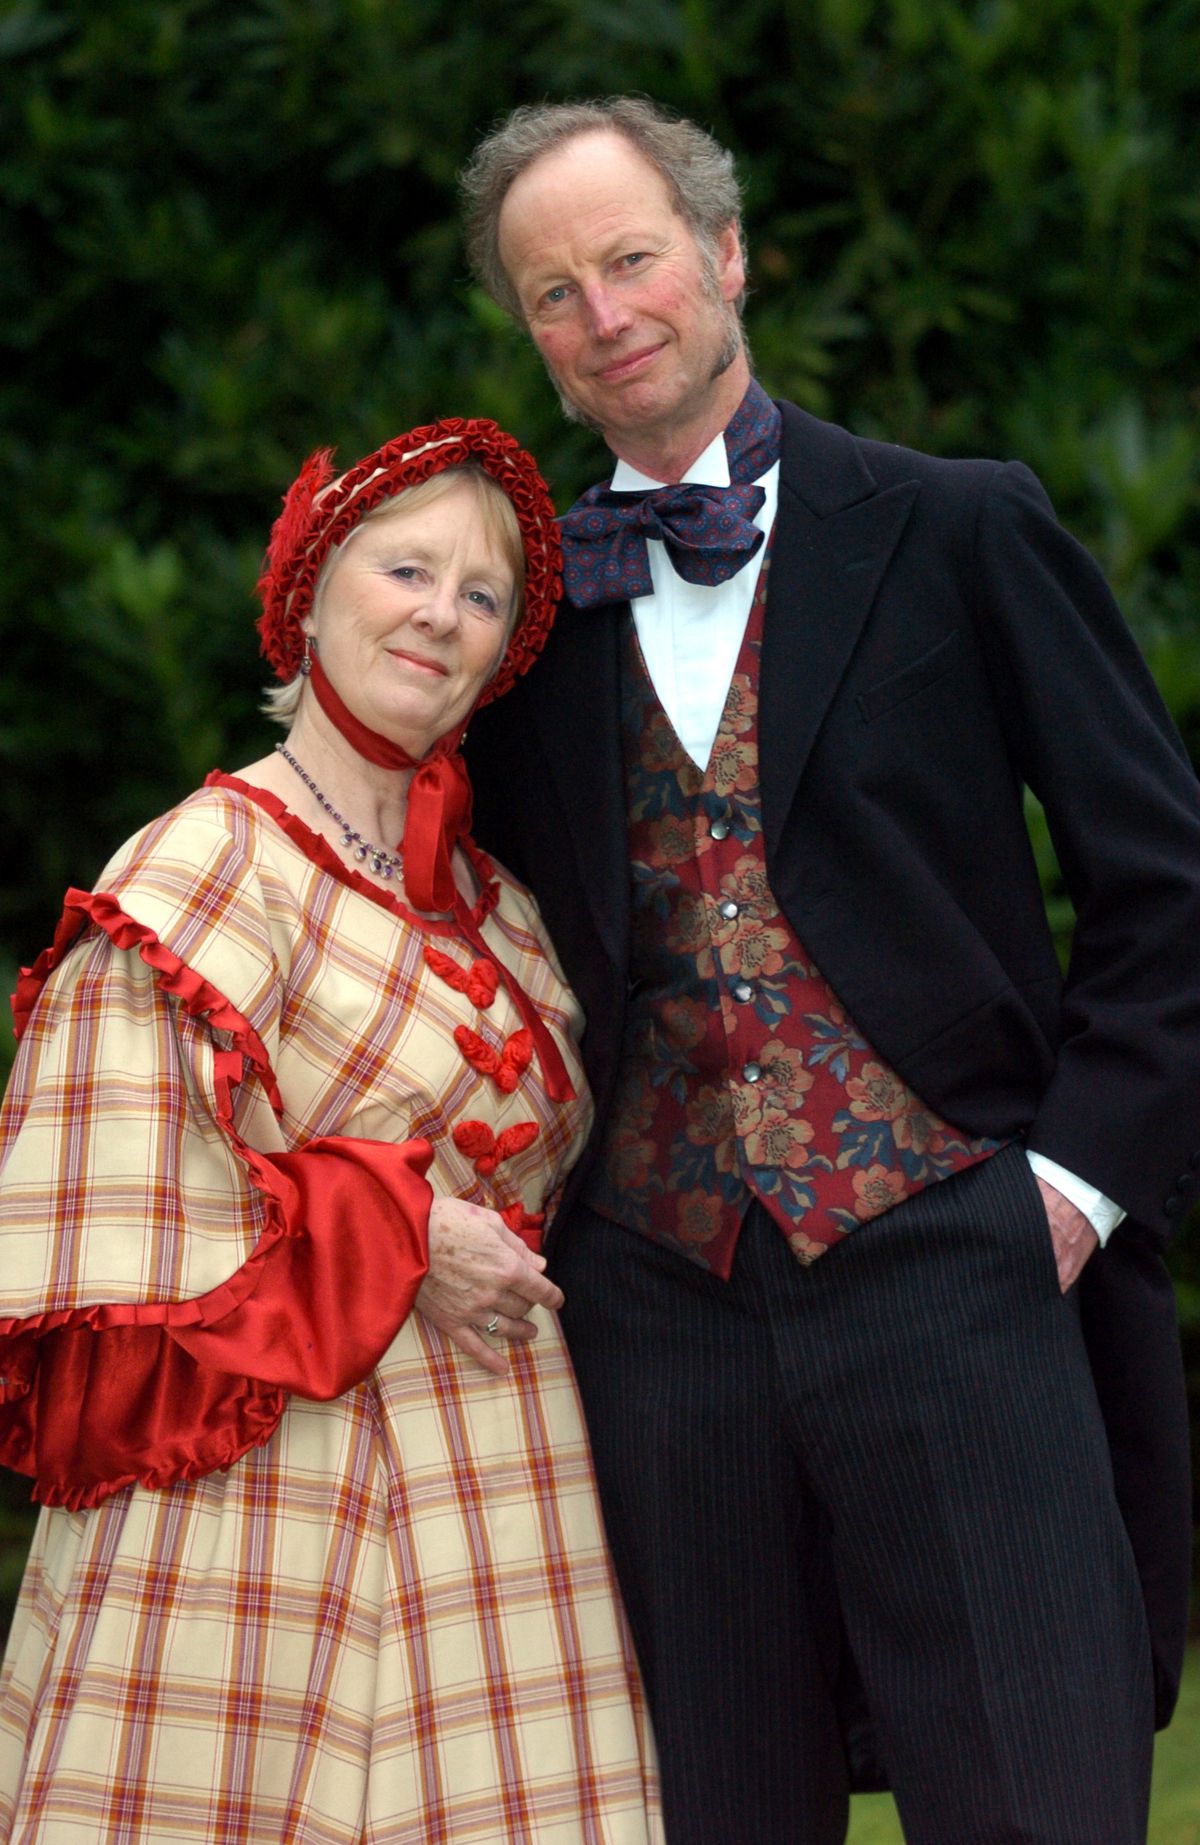 Andrew Bannerman and Jill Teear, playing Charles Darwin and Emma at the Darwin birthday celebrations held at Darwin House on the Mount in Shrewsbury in 2004.